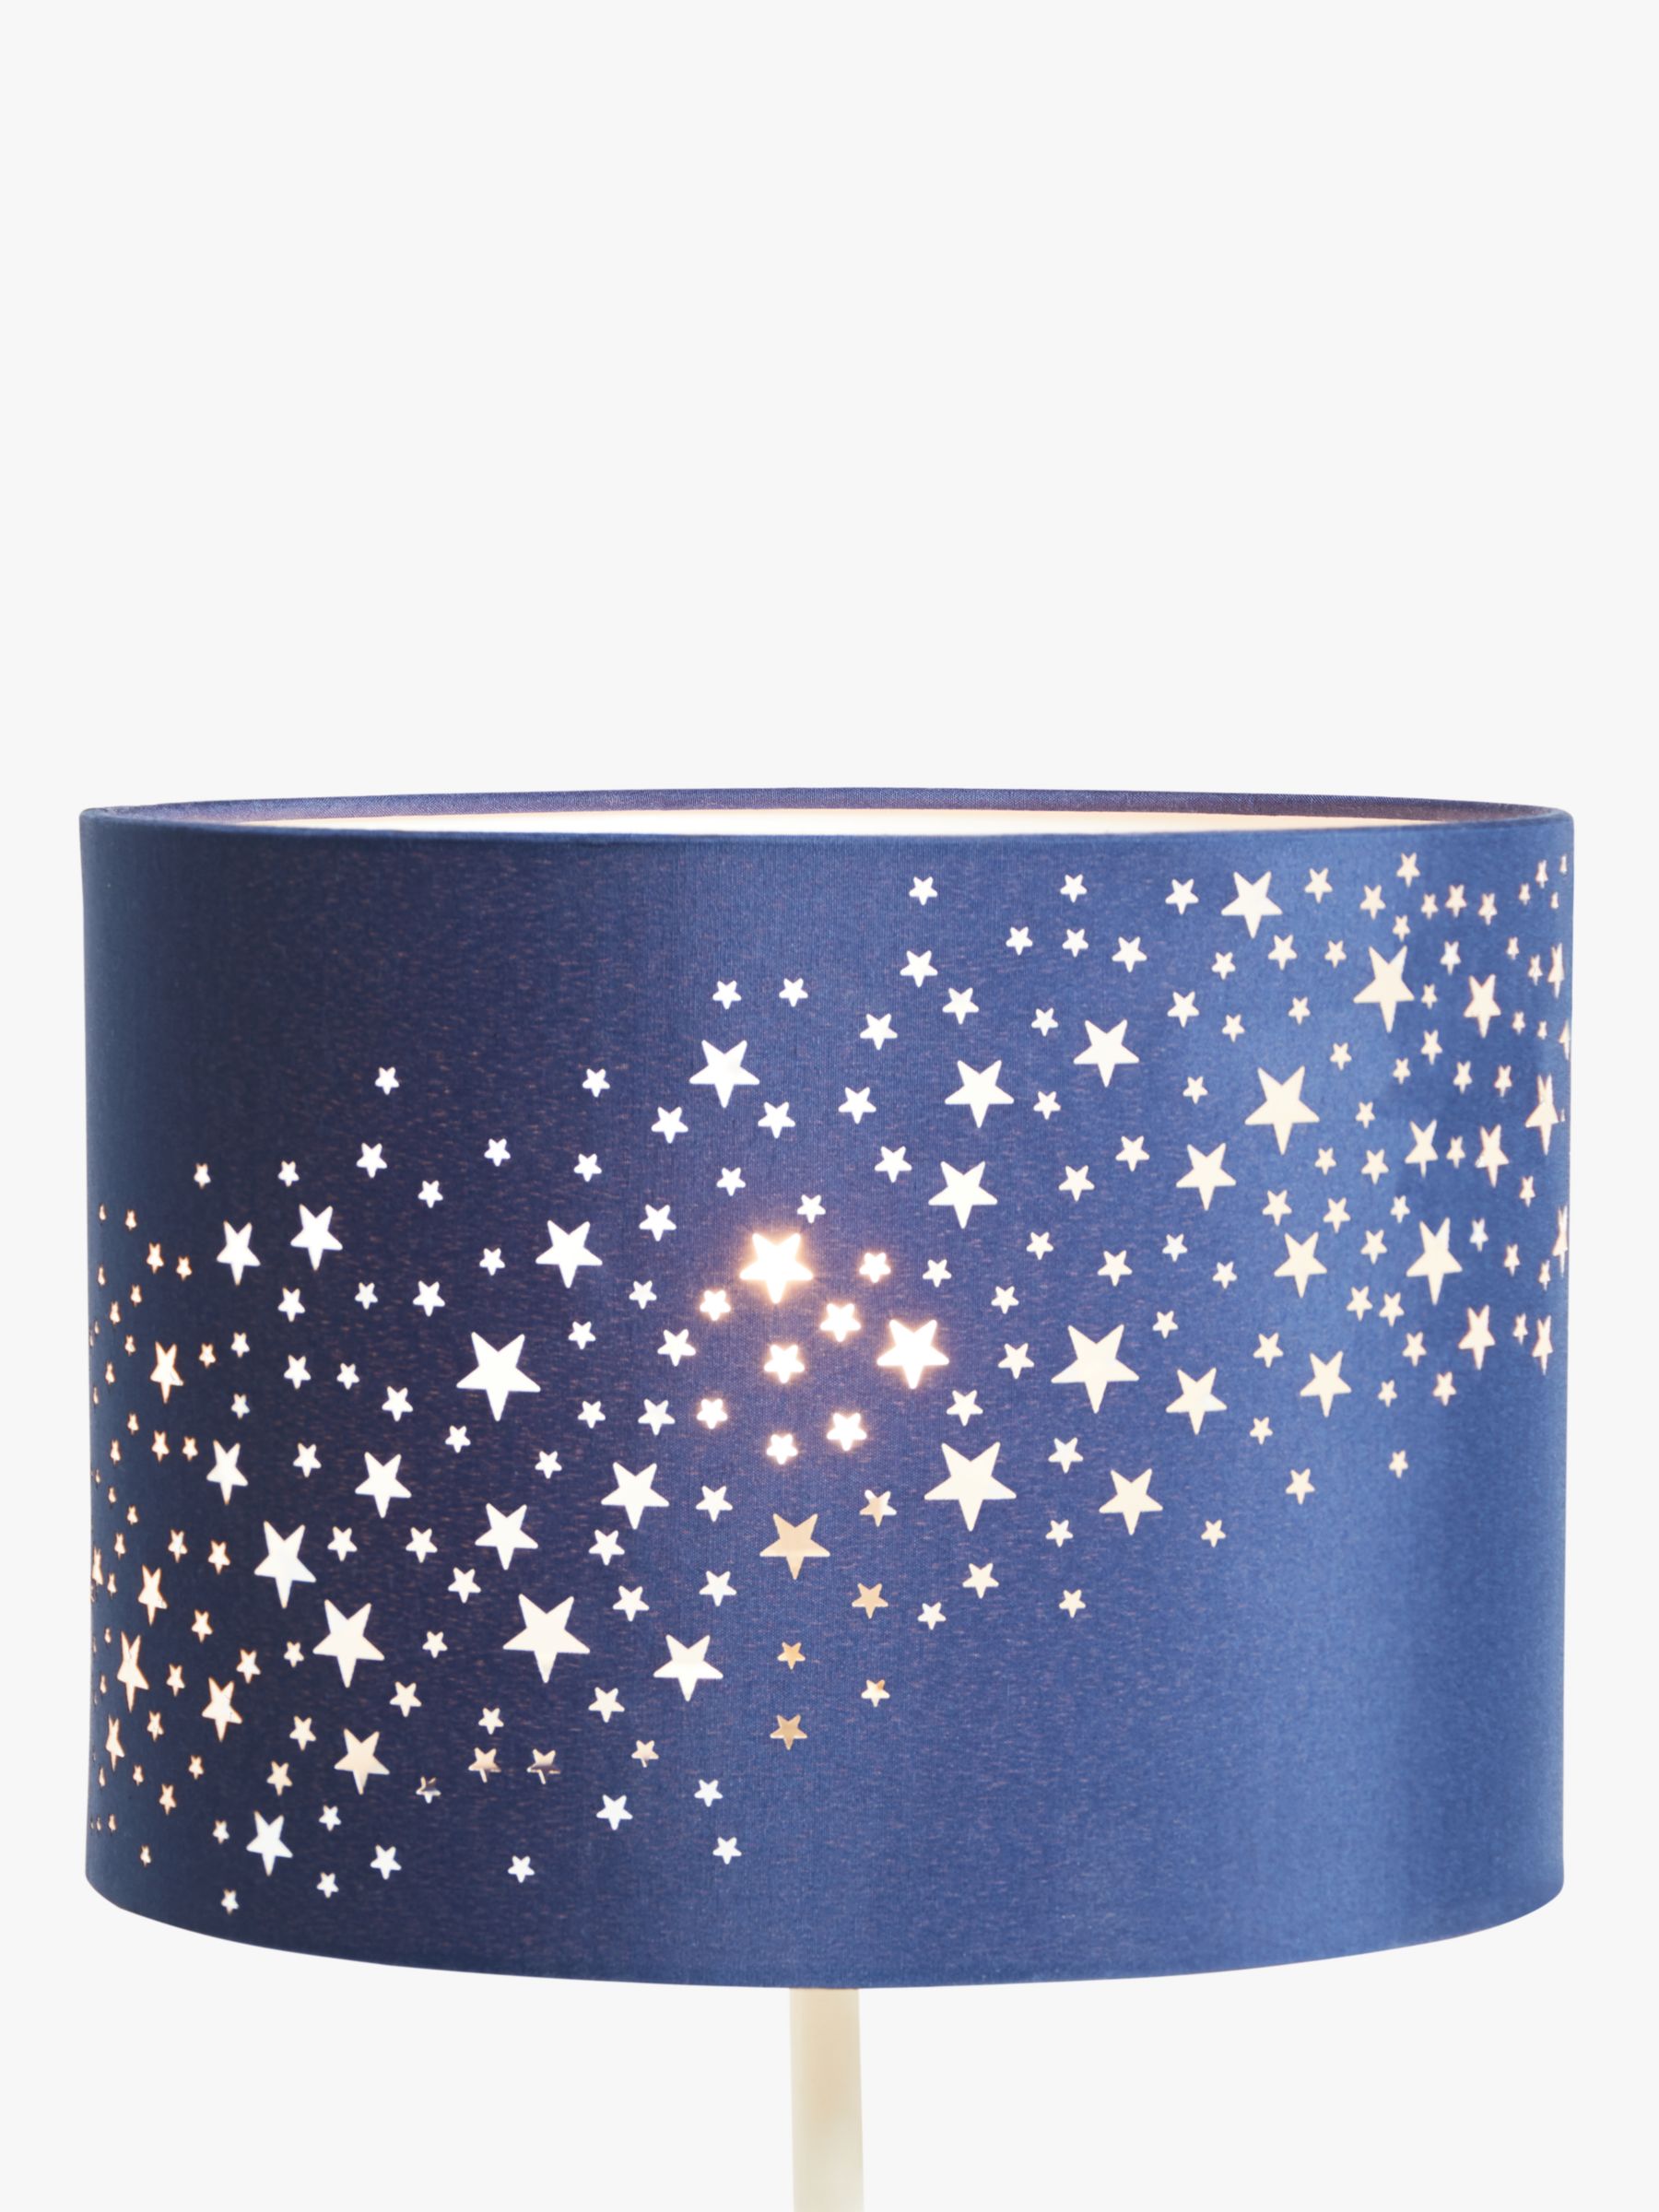 Photo of Little home at john lewis stardust lampshade